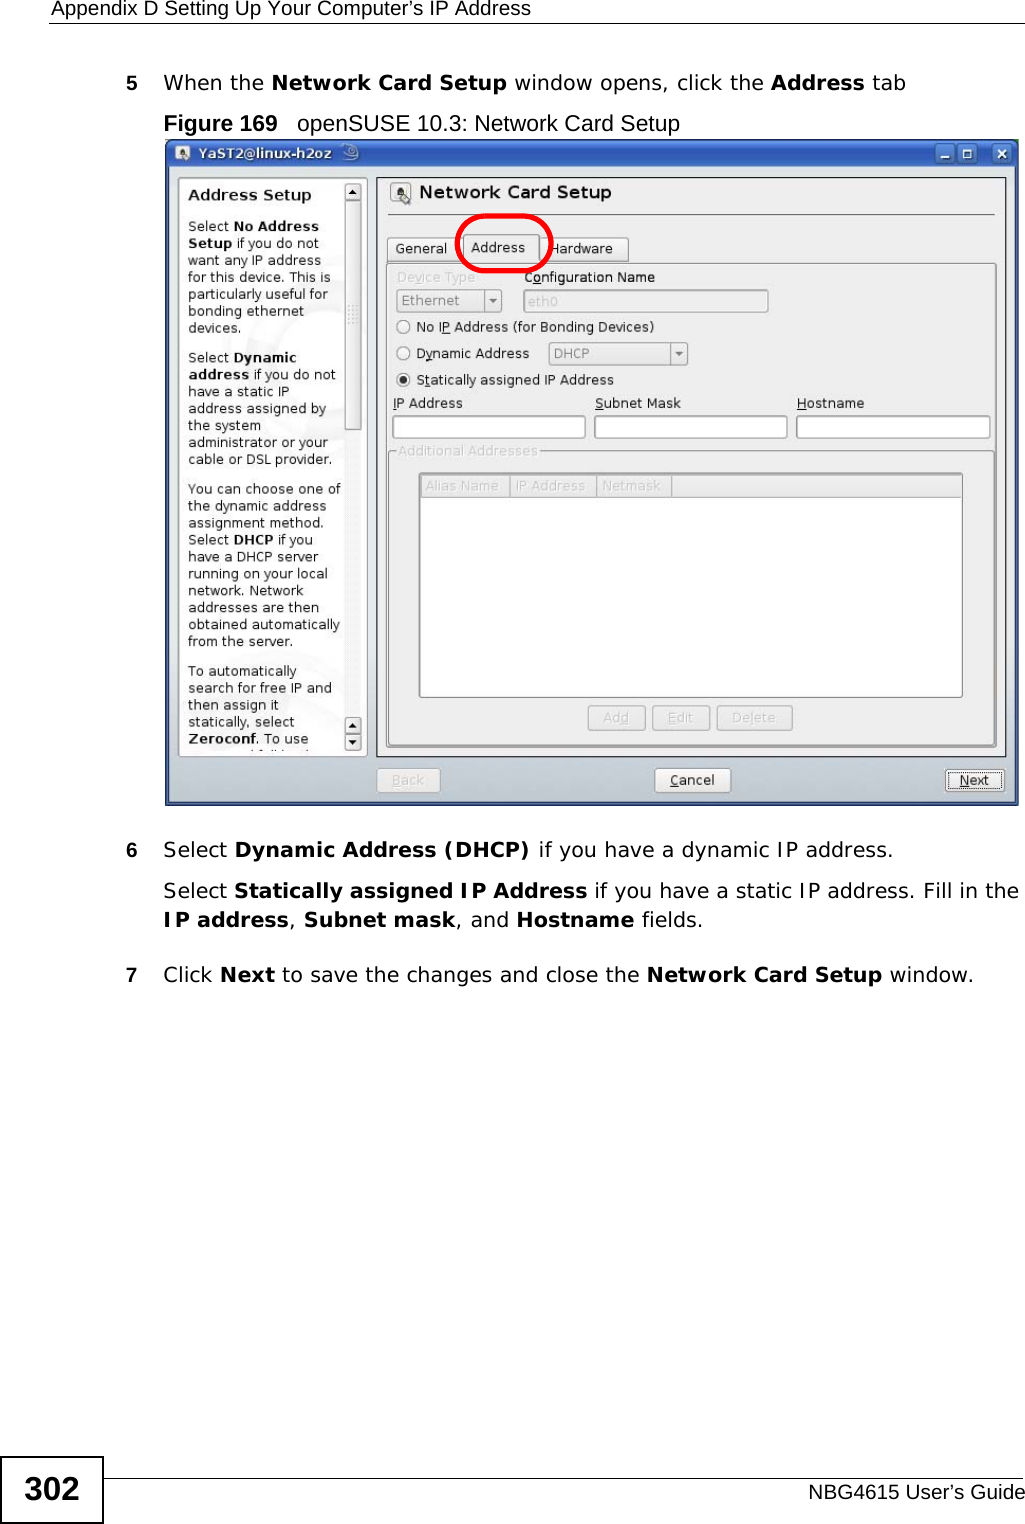 Appendix D Setting Up Your Computer’s IP AddressNBG4615 User’s Guide3025When the Network Card Setup window opens, click the Address tabFigure 169   openSUSE 10.3: Network Card Setup6Select Dynamic Address (DHCP) if you have a dynamic IP address.Select Statically assigned IP Address if you have a static IP address. Fill in the IP address, Subnet mask, and Hostname fields.7Click Next to save the changes and close the Network Card Setup window. 